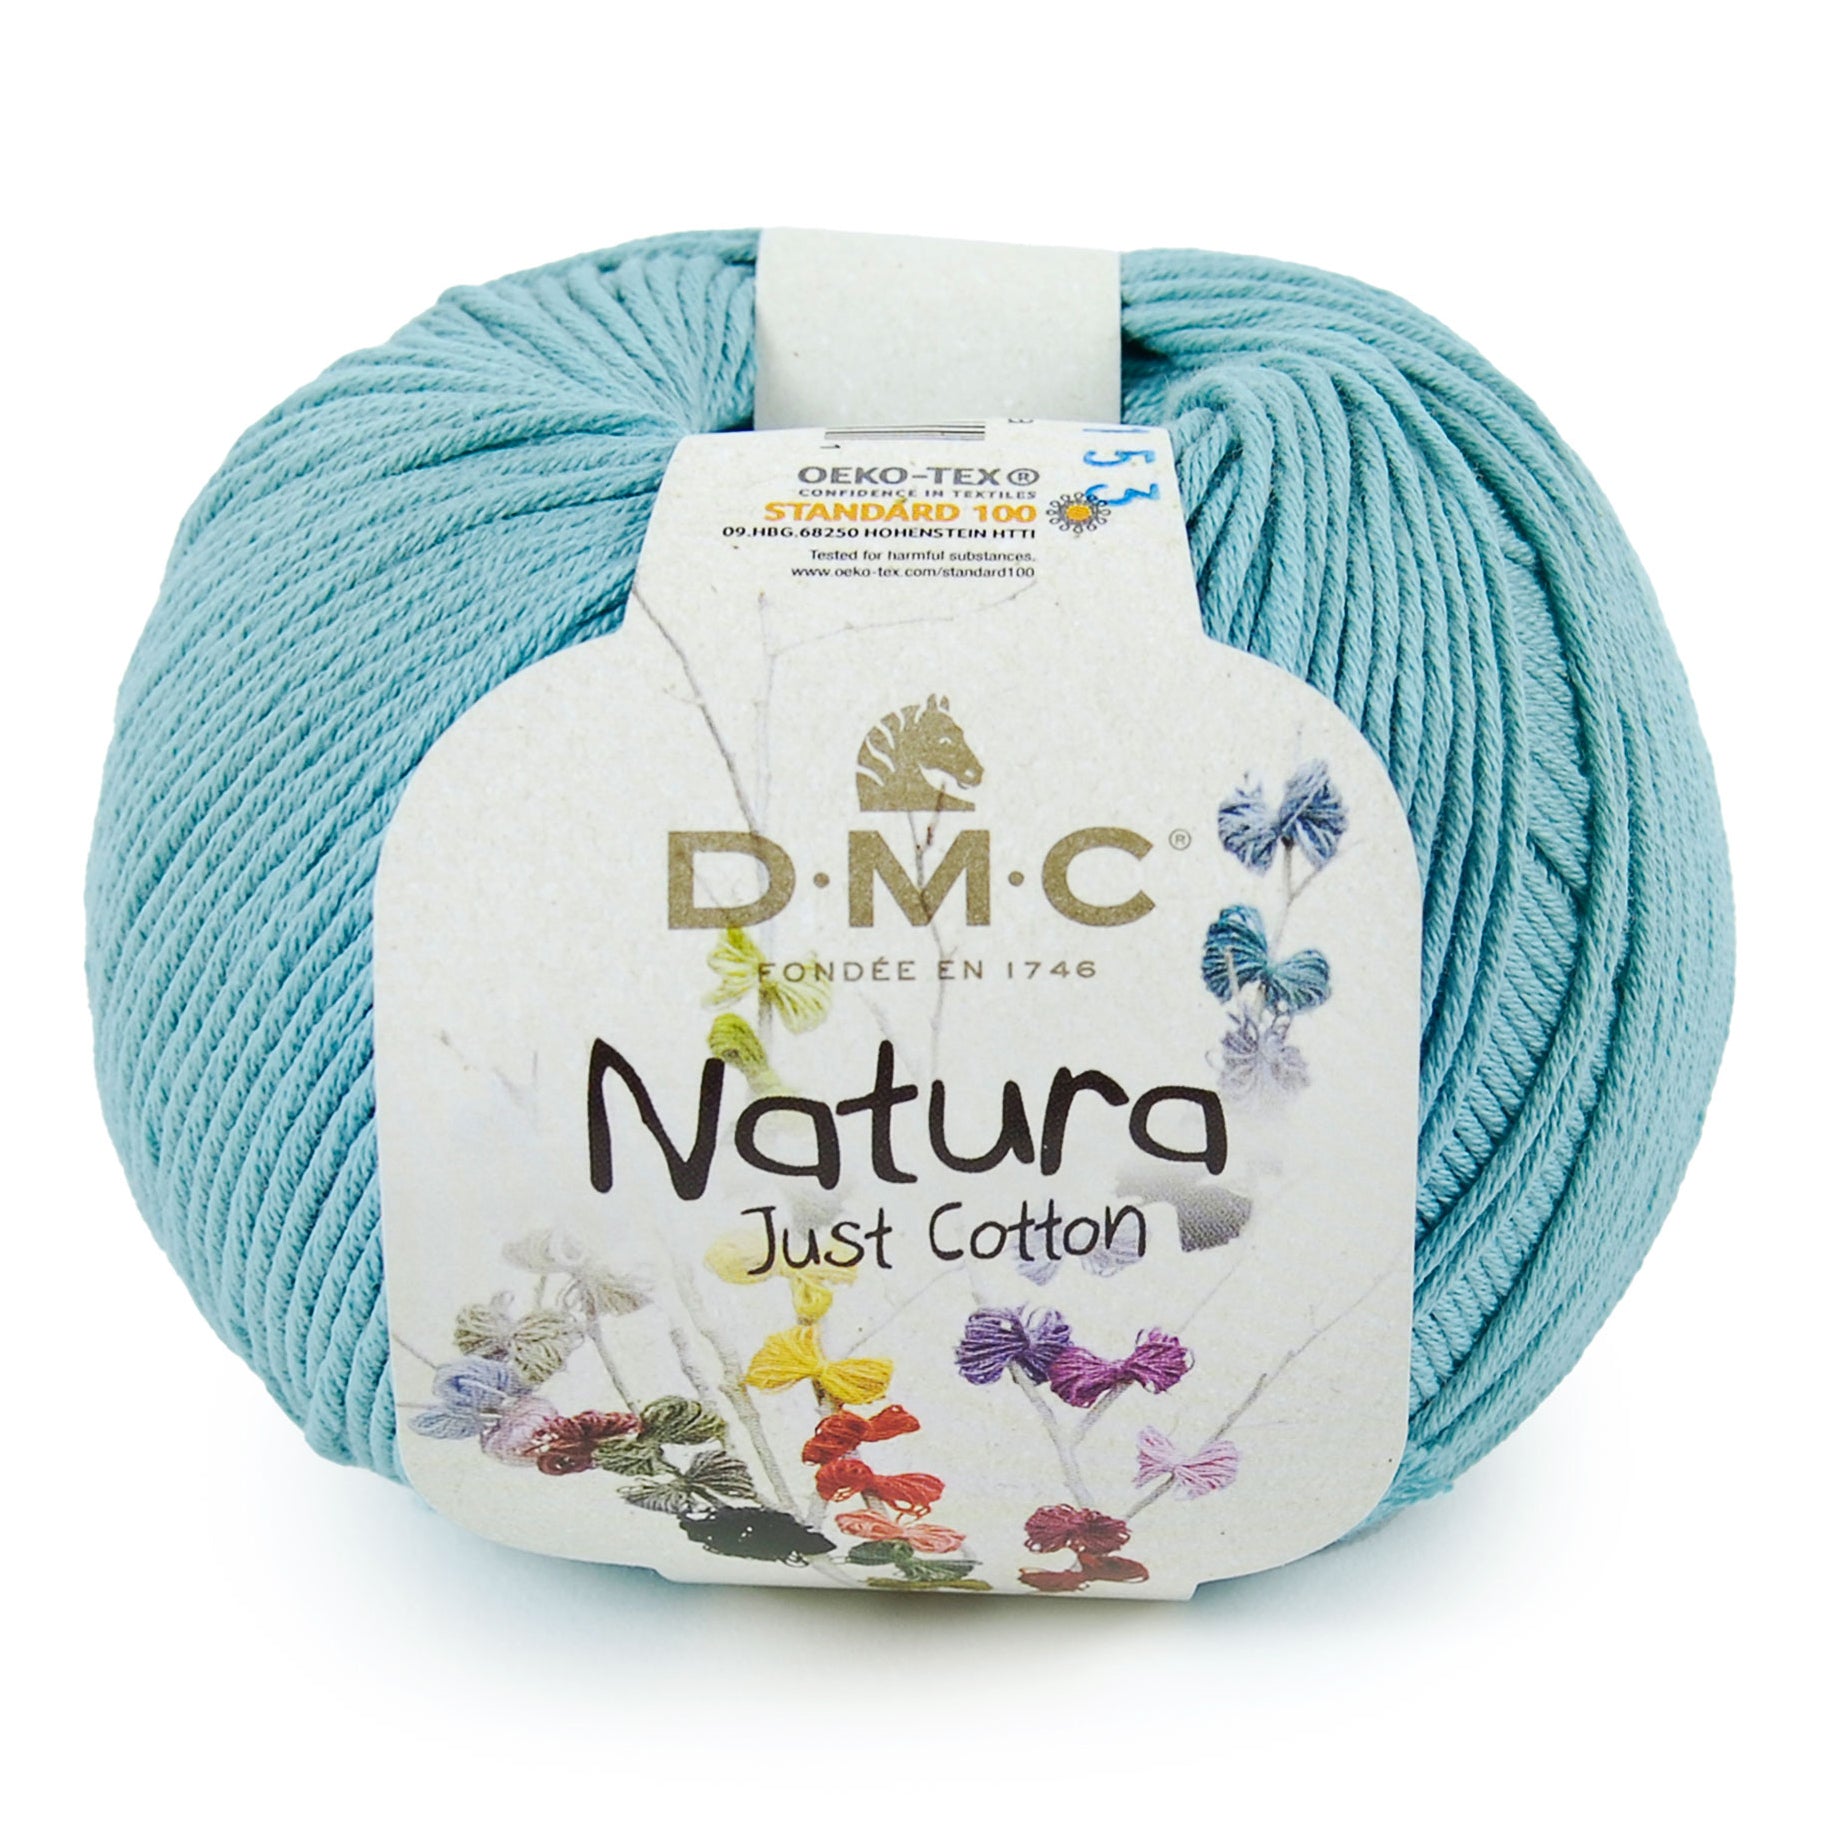 DMC Natura Just Cotton - Threads for Knitting and Crochet 100% Cotton